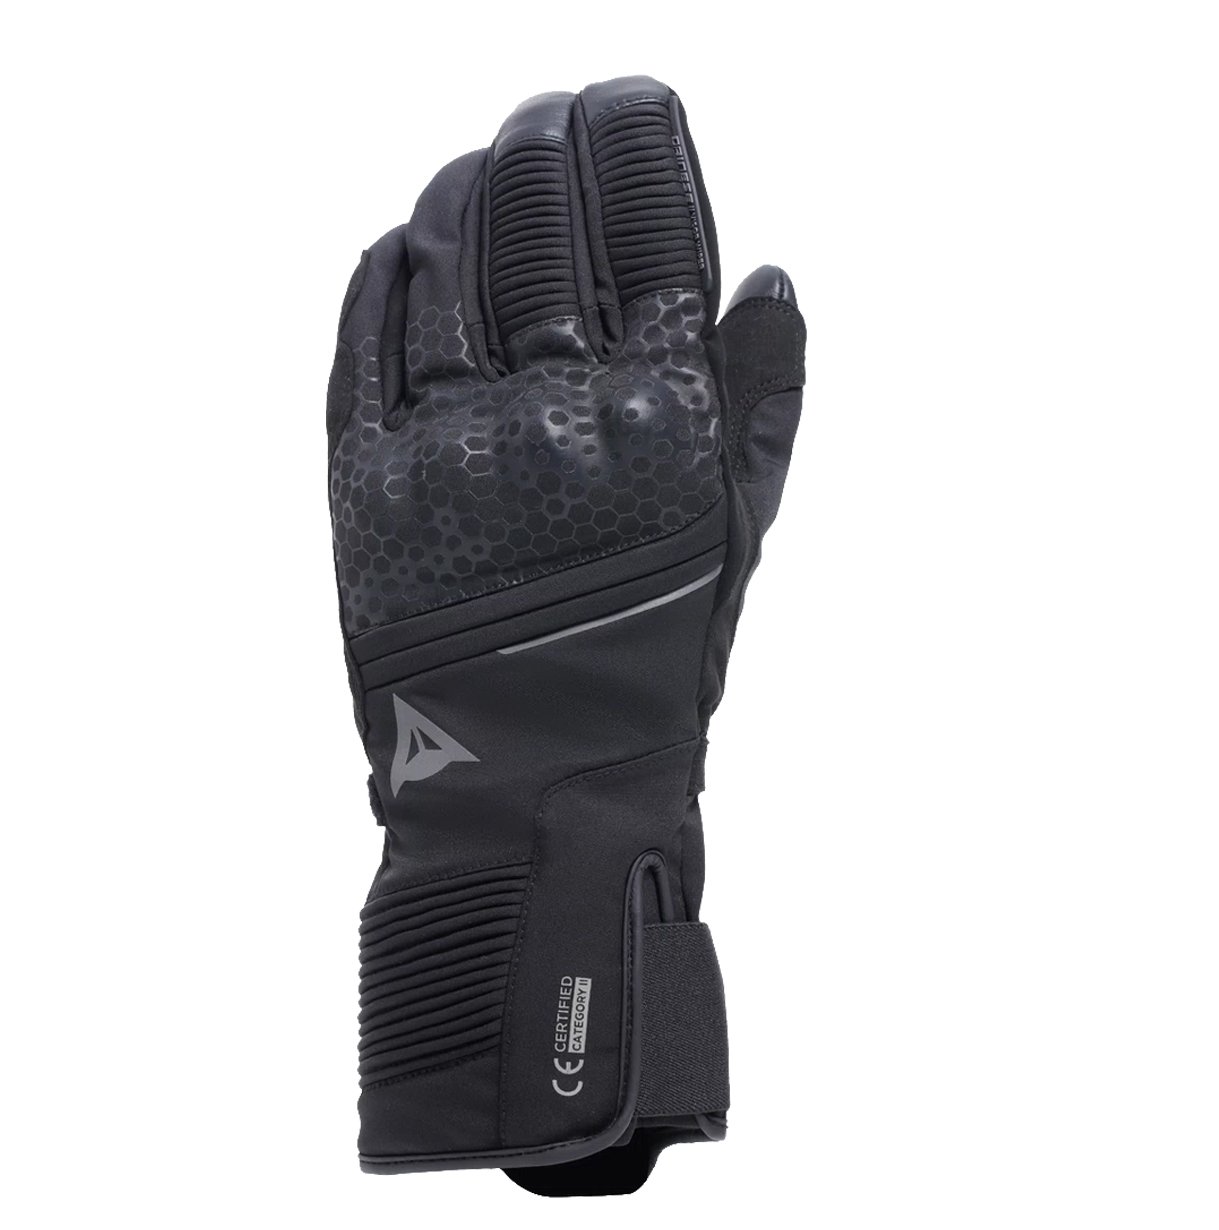 Image of Dainese Tempest 2 D-Dry Long Thermal Gloves Black Size XL EN